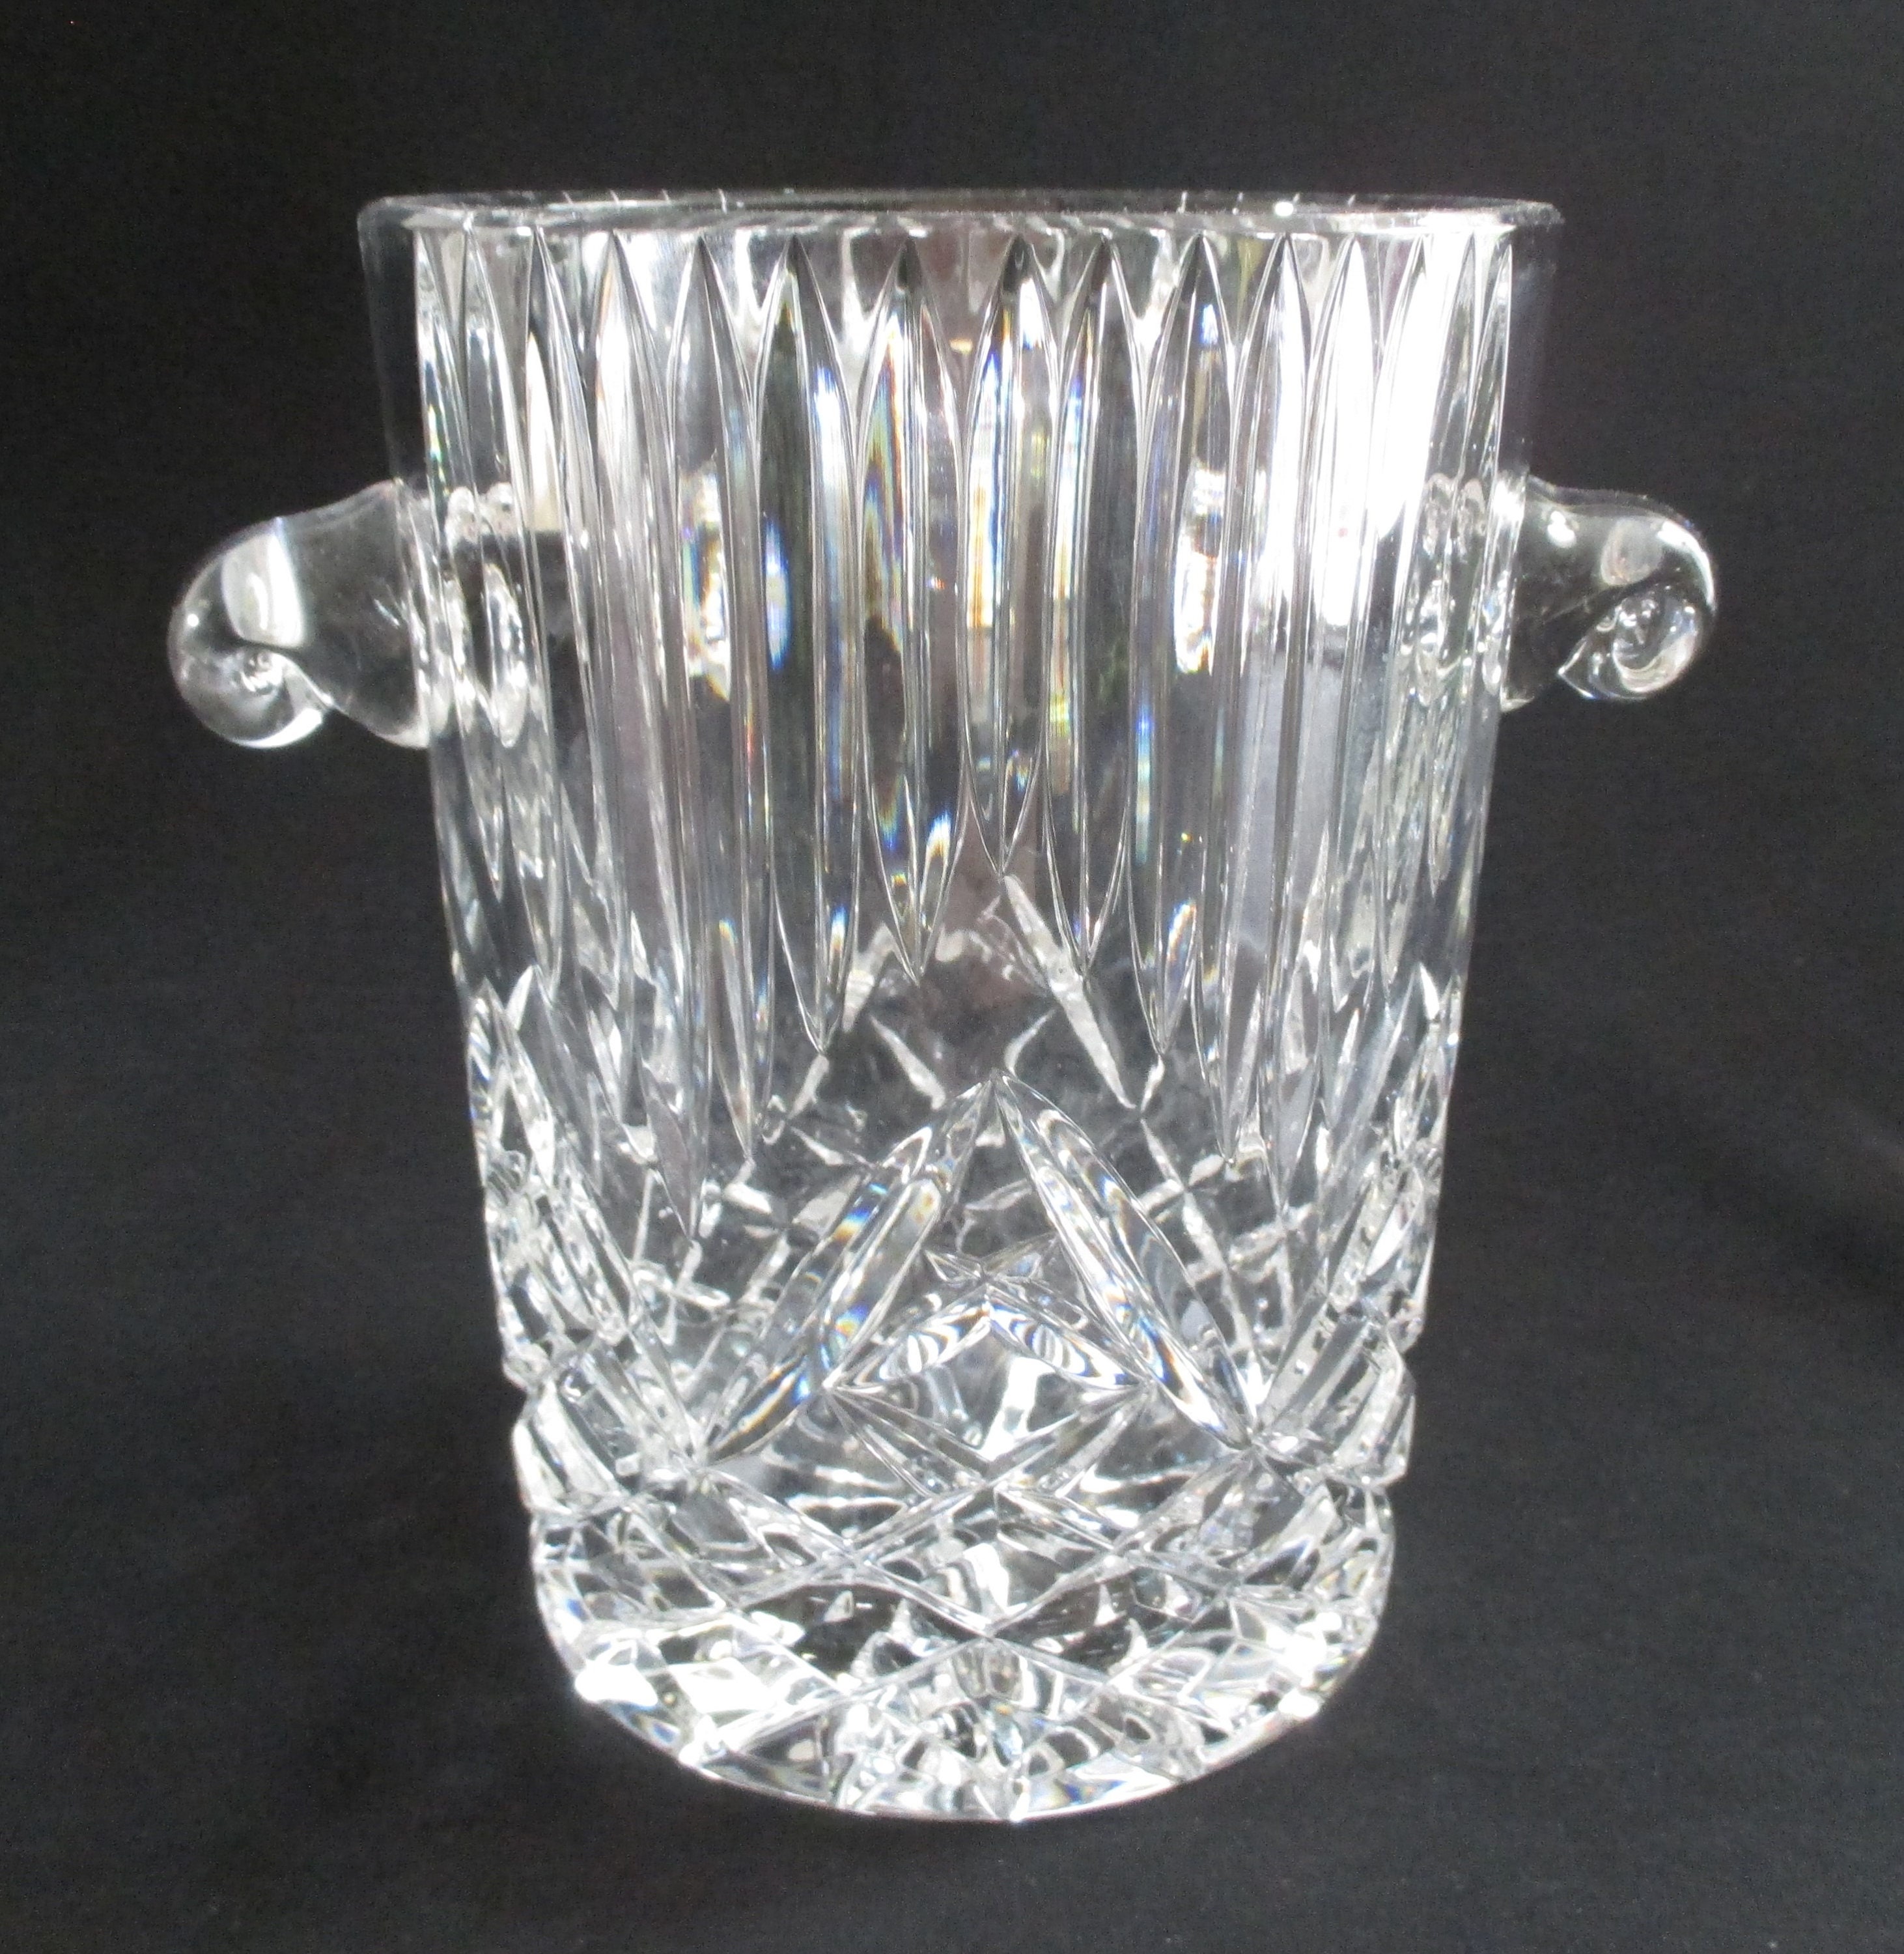  Glassware hand-made in Biot France Ice cubes Bucket